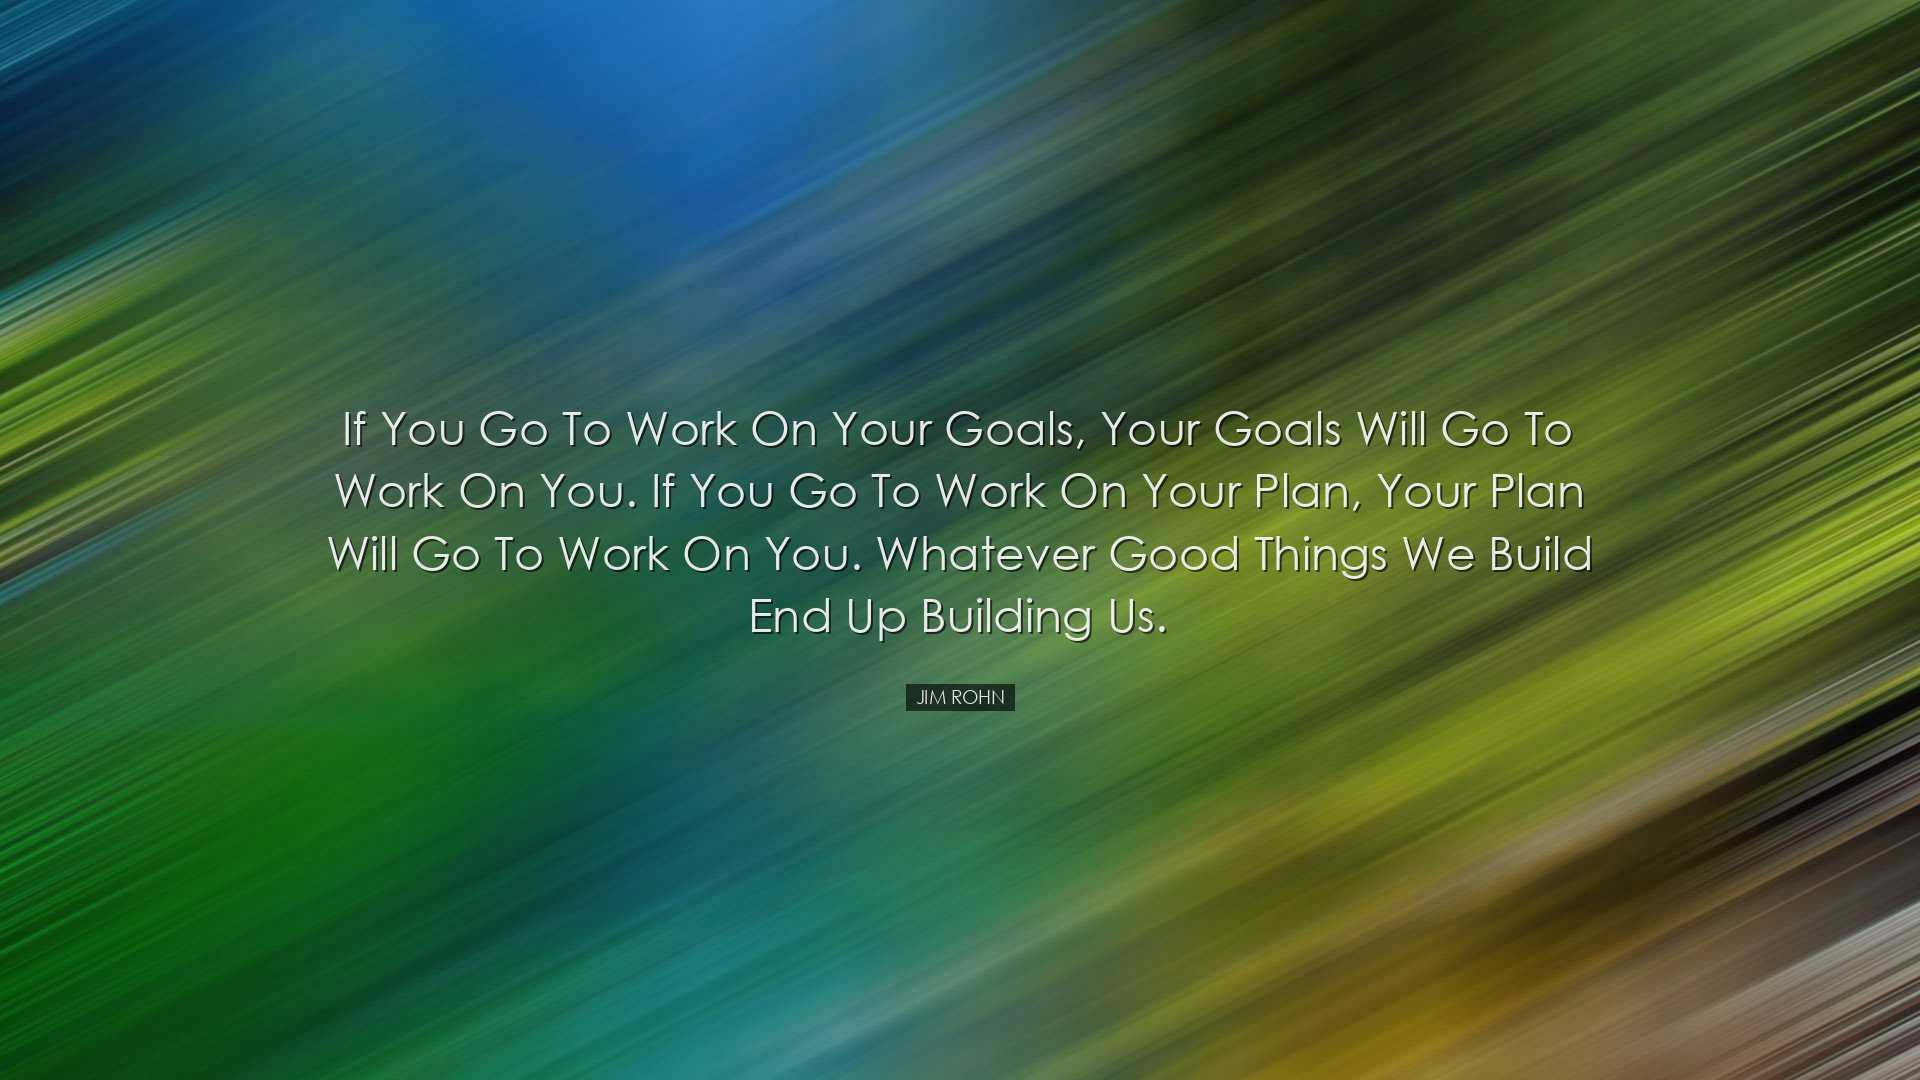 If you go to work on your goals, your goals will go to work on you